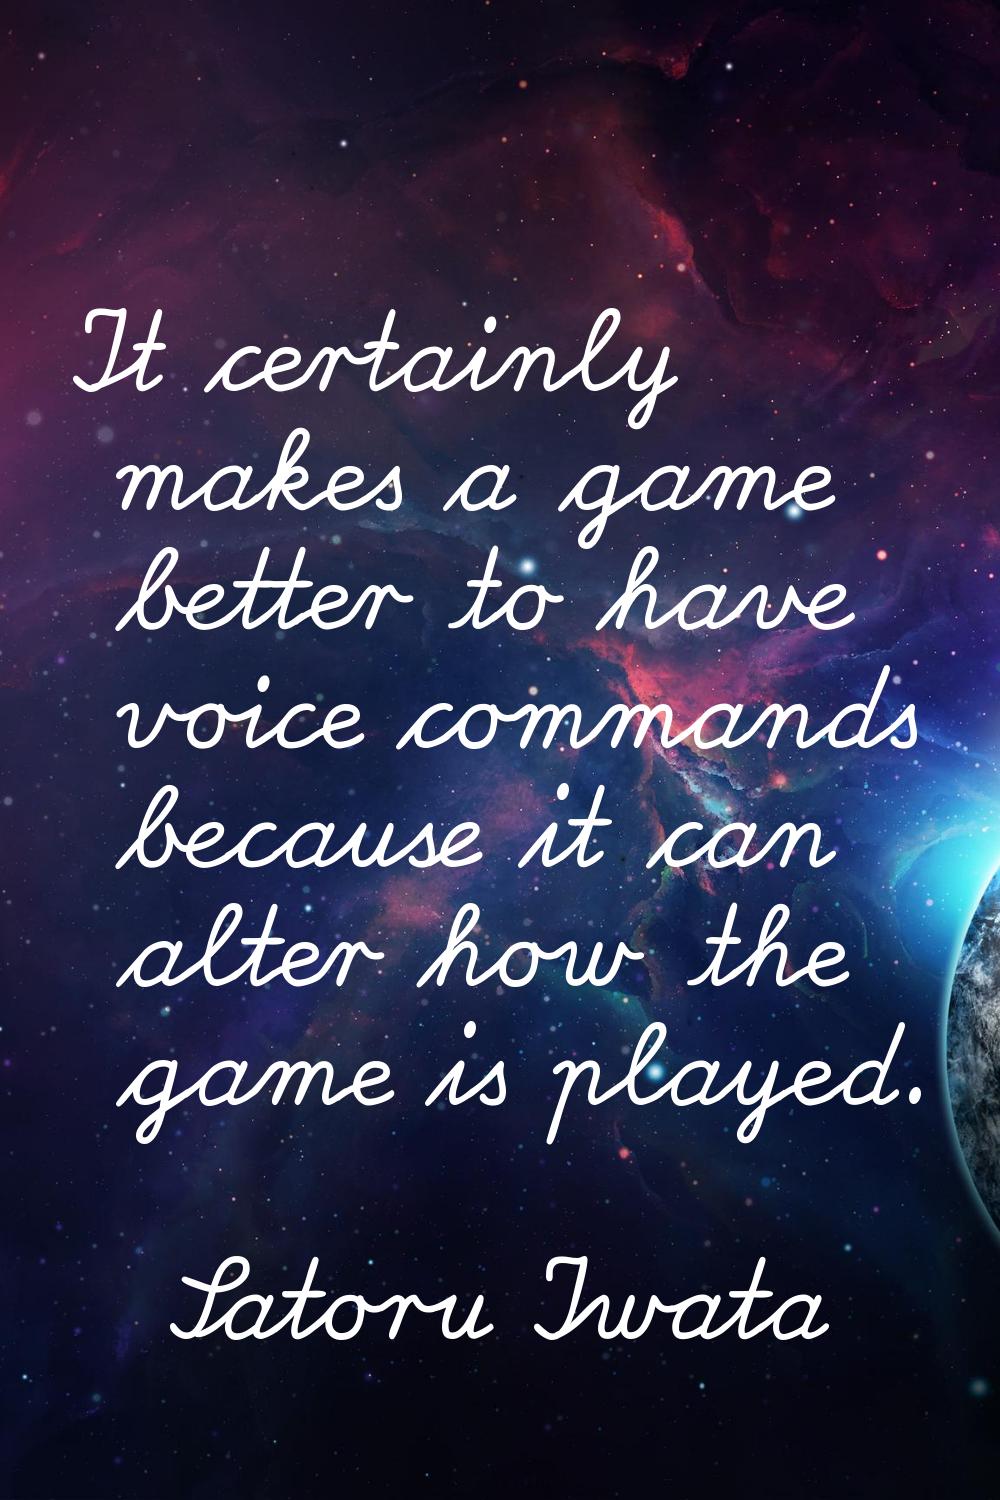 It certainly makes a game better to have voice commands because it can alter how the game is played